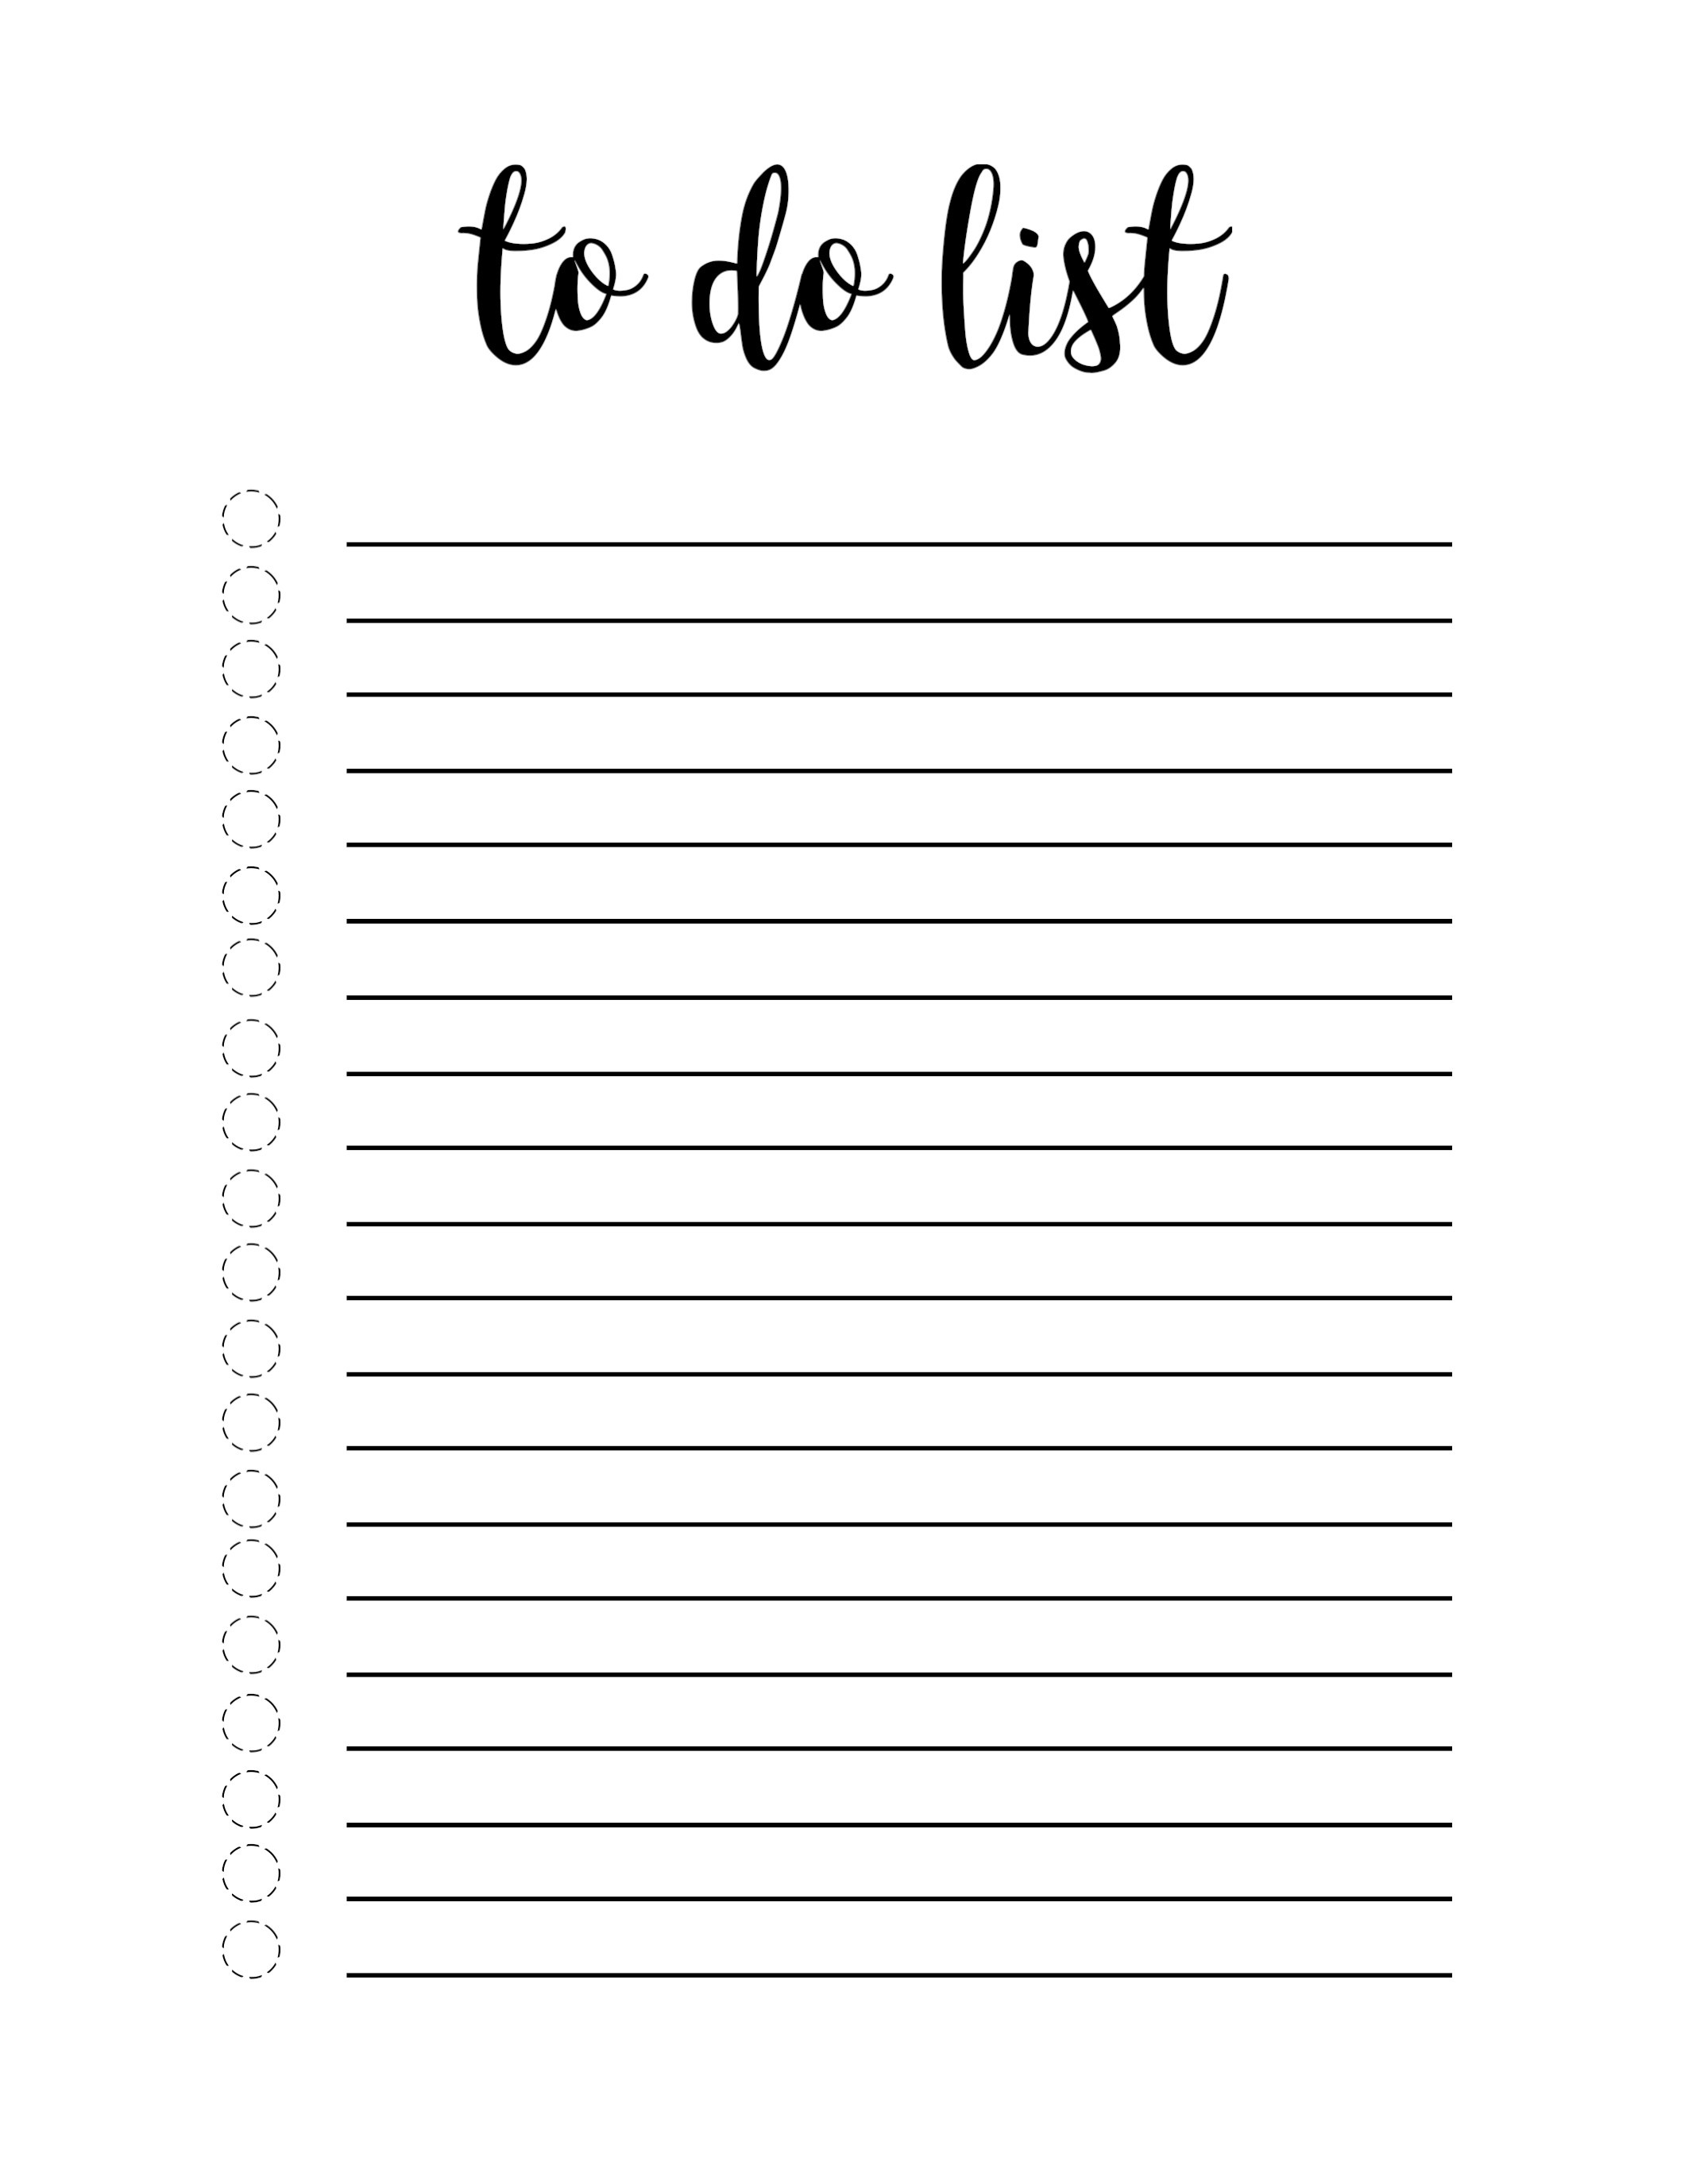 Free Printable To Do List Template - Paper Trail Design - Free Printable List